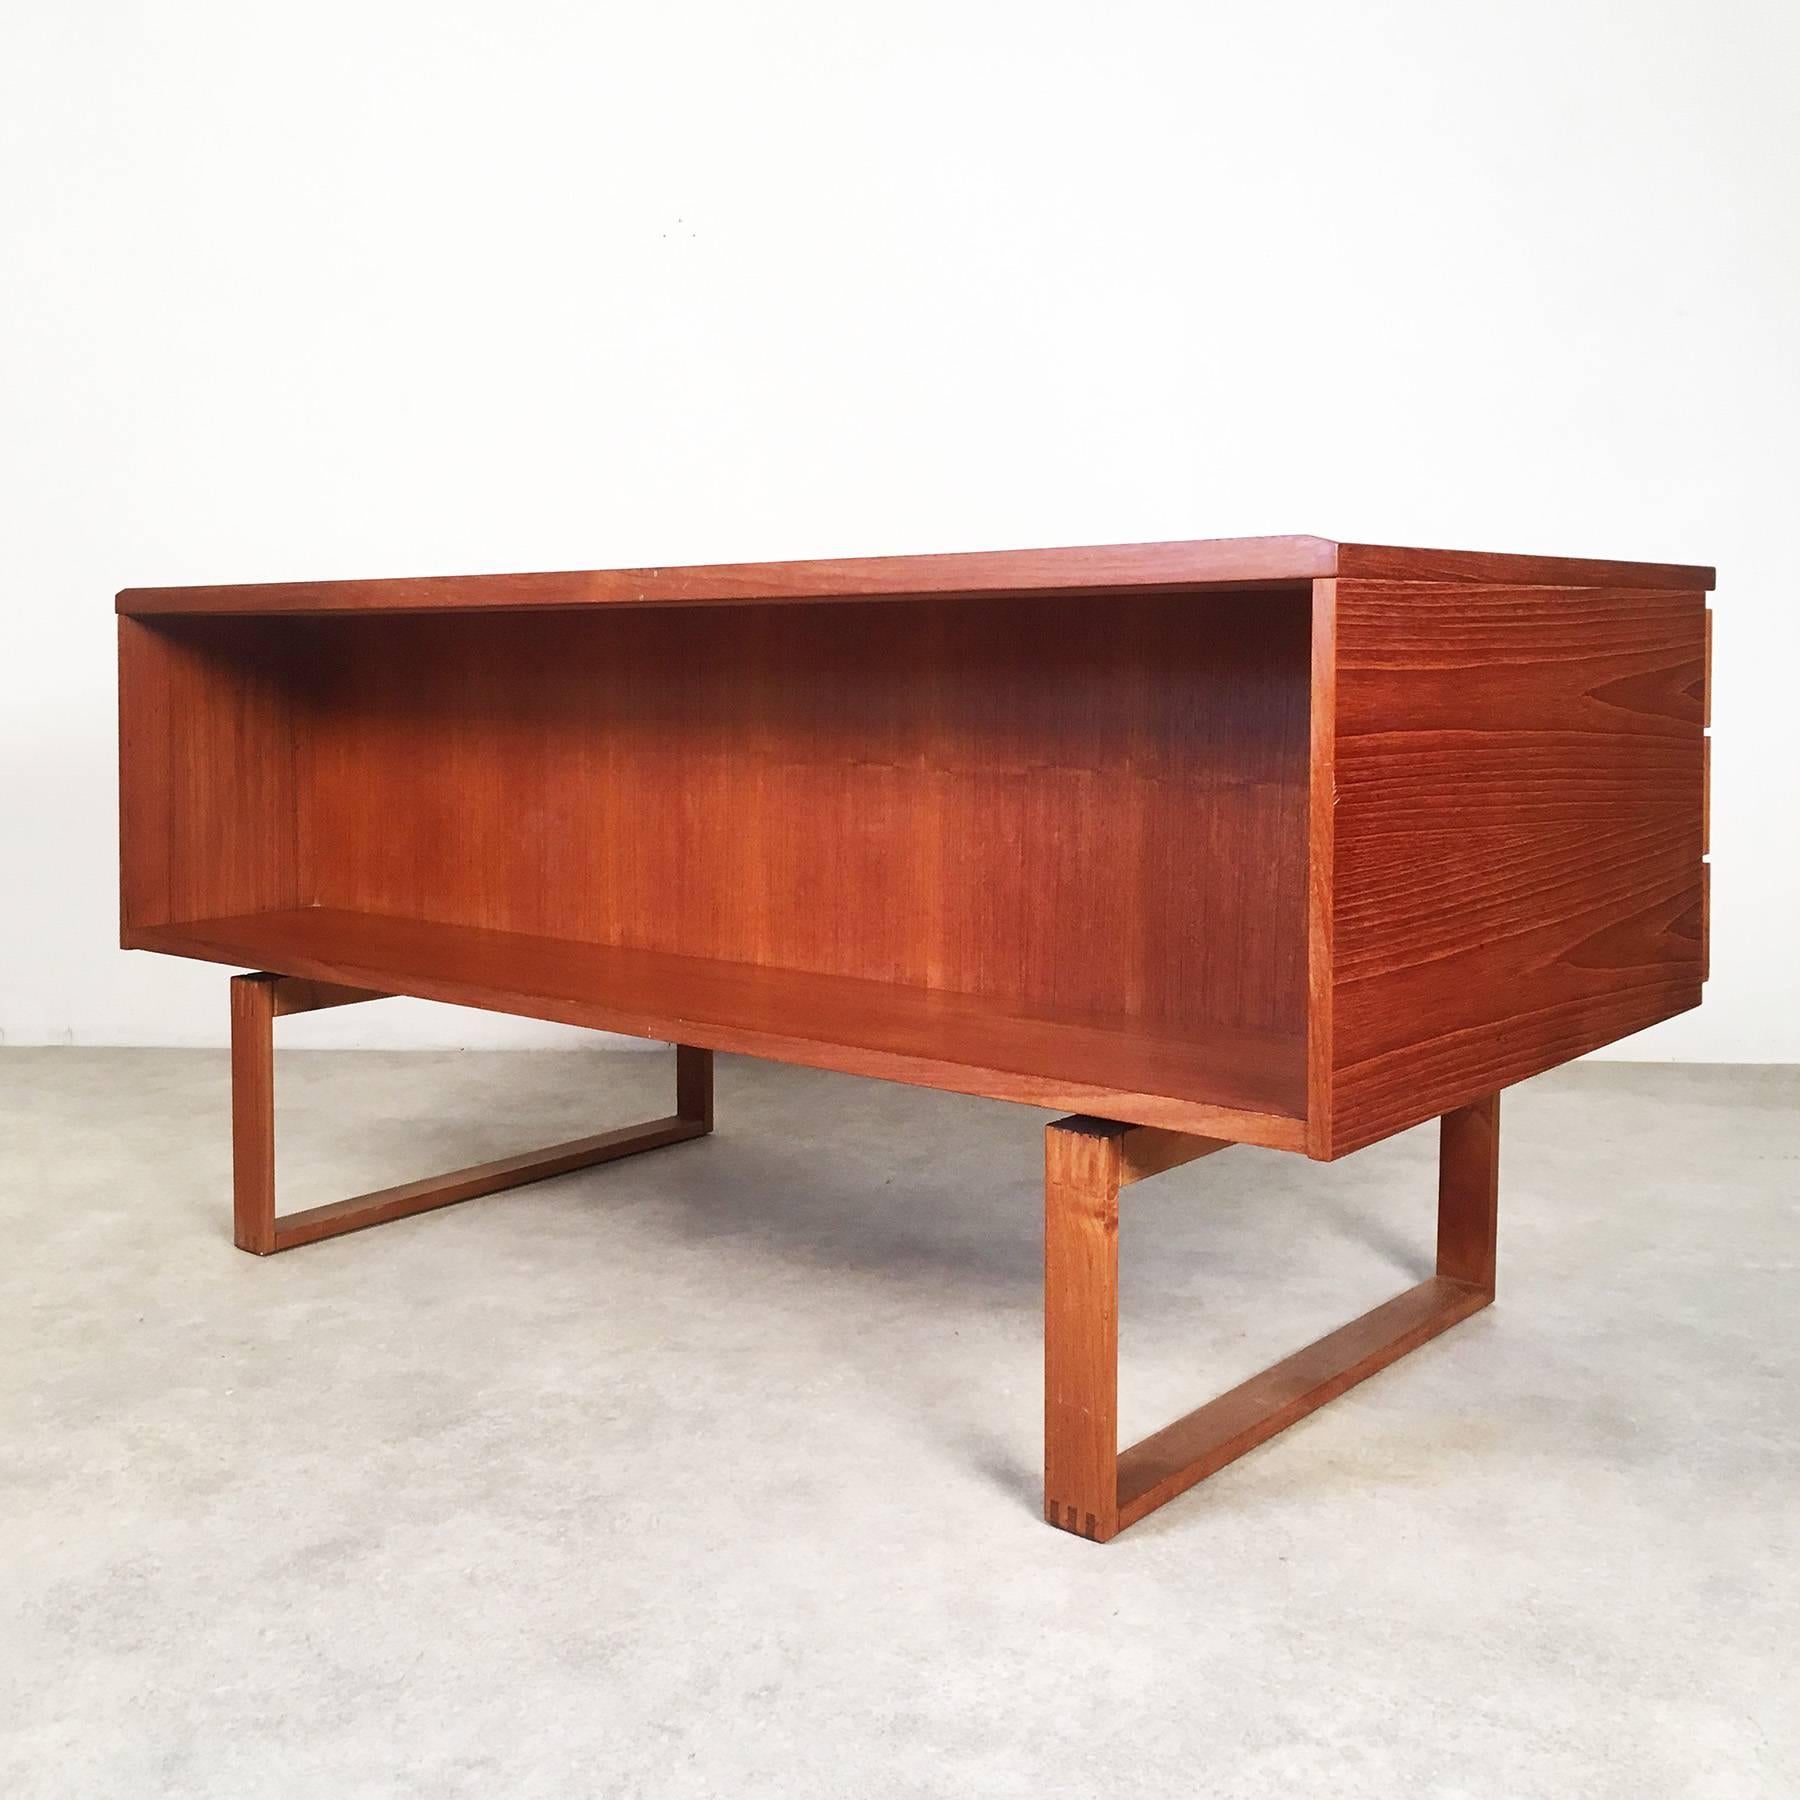 Executive teak desk, manufactured in the 1970s by Bramin. The design of this piece is usually attributed to Kai Kristiansen.

The piece stands out for its plain design with beautiful details, and a lot of storage space. It is made of teak wood.